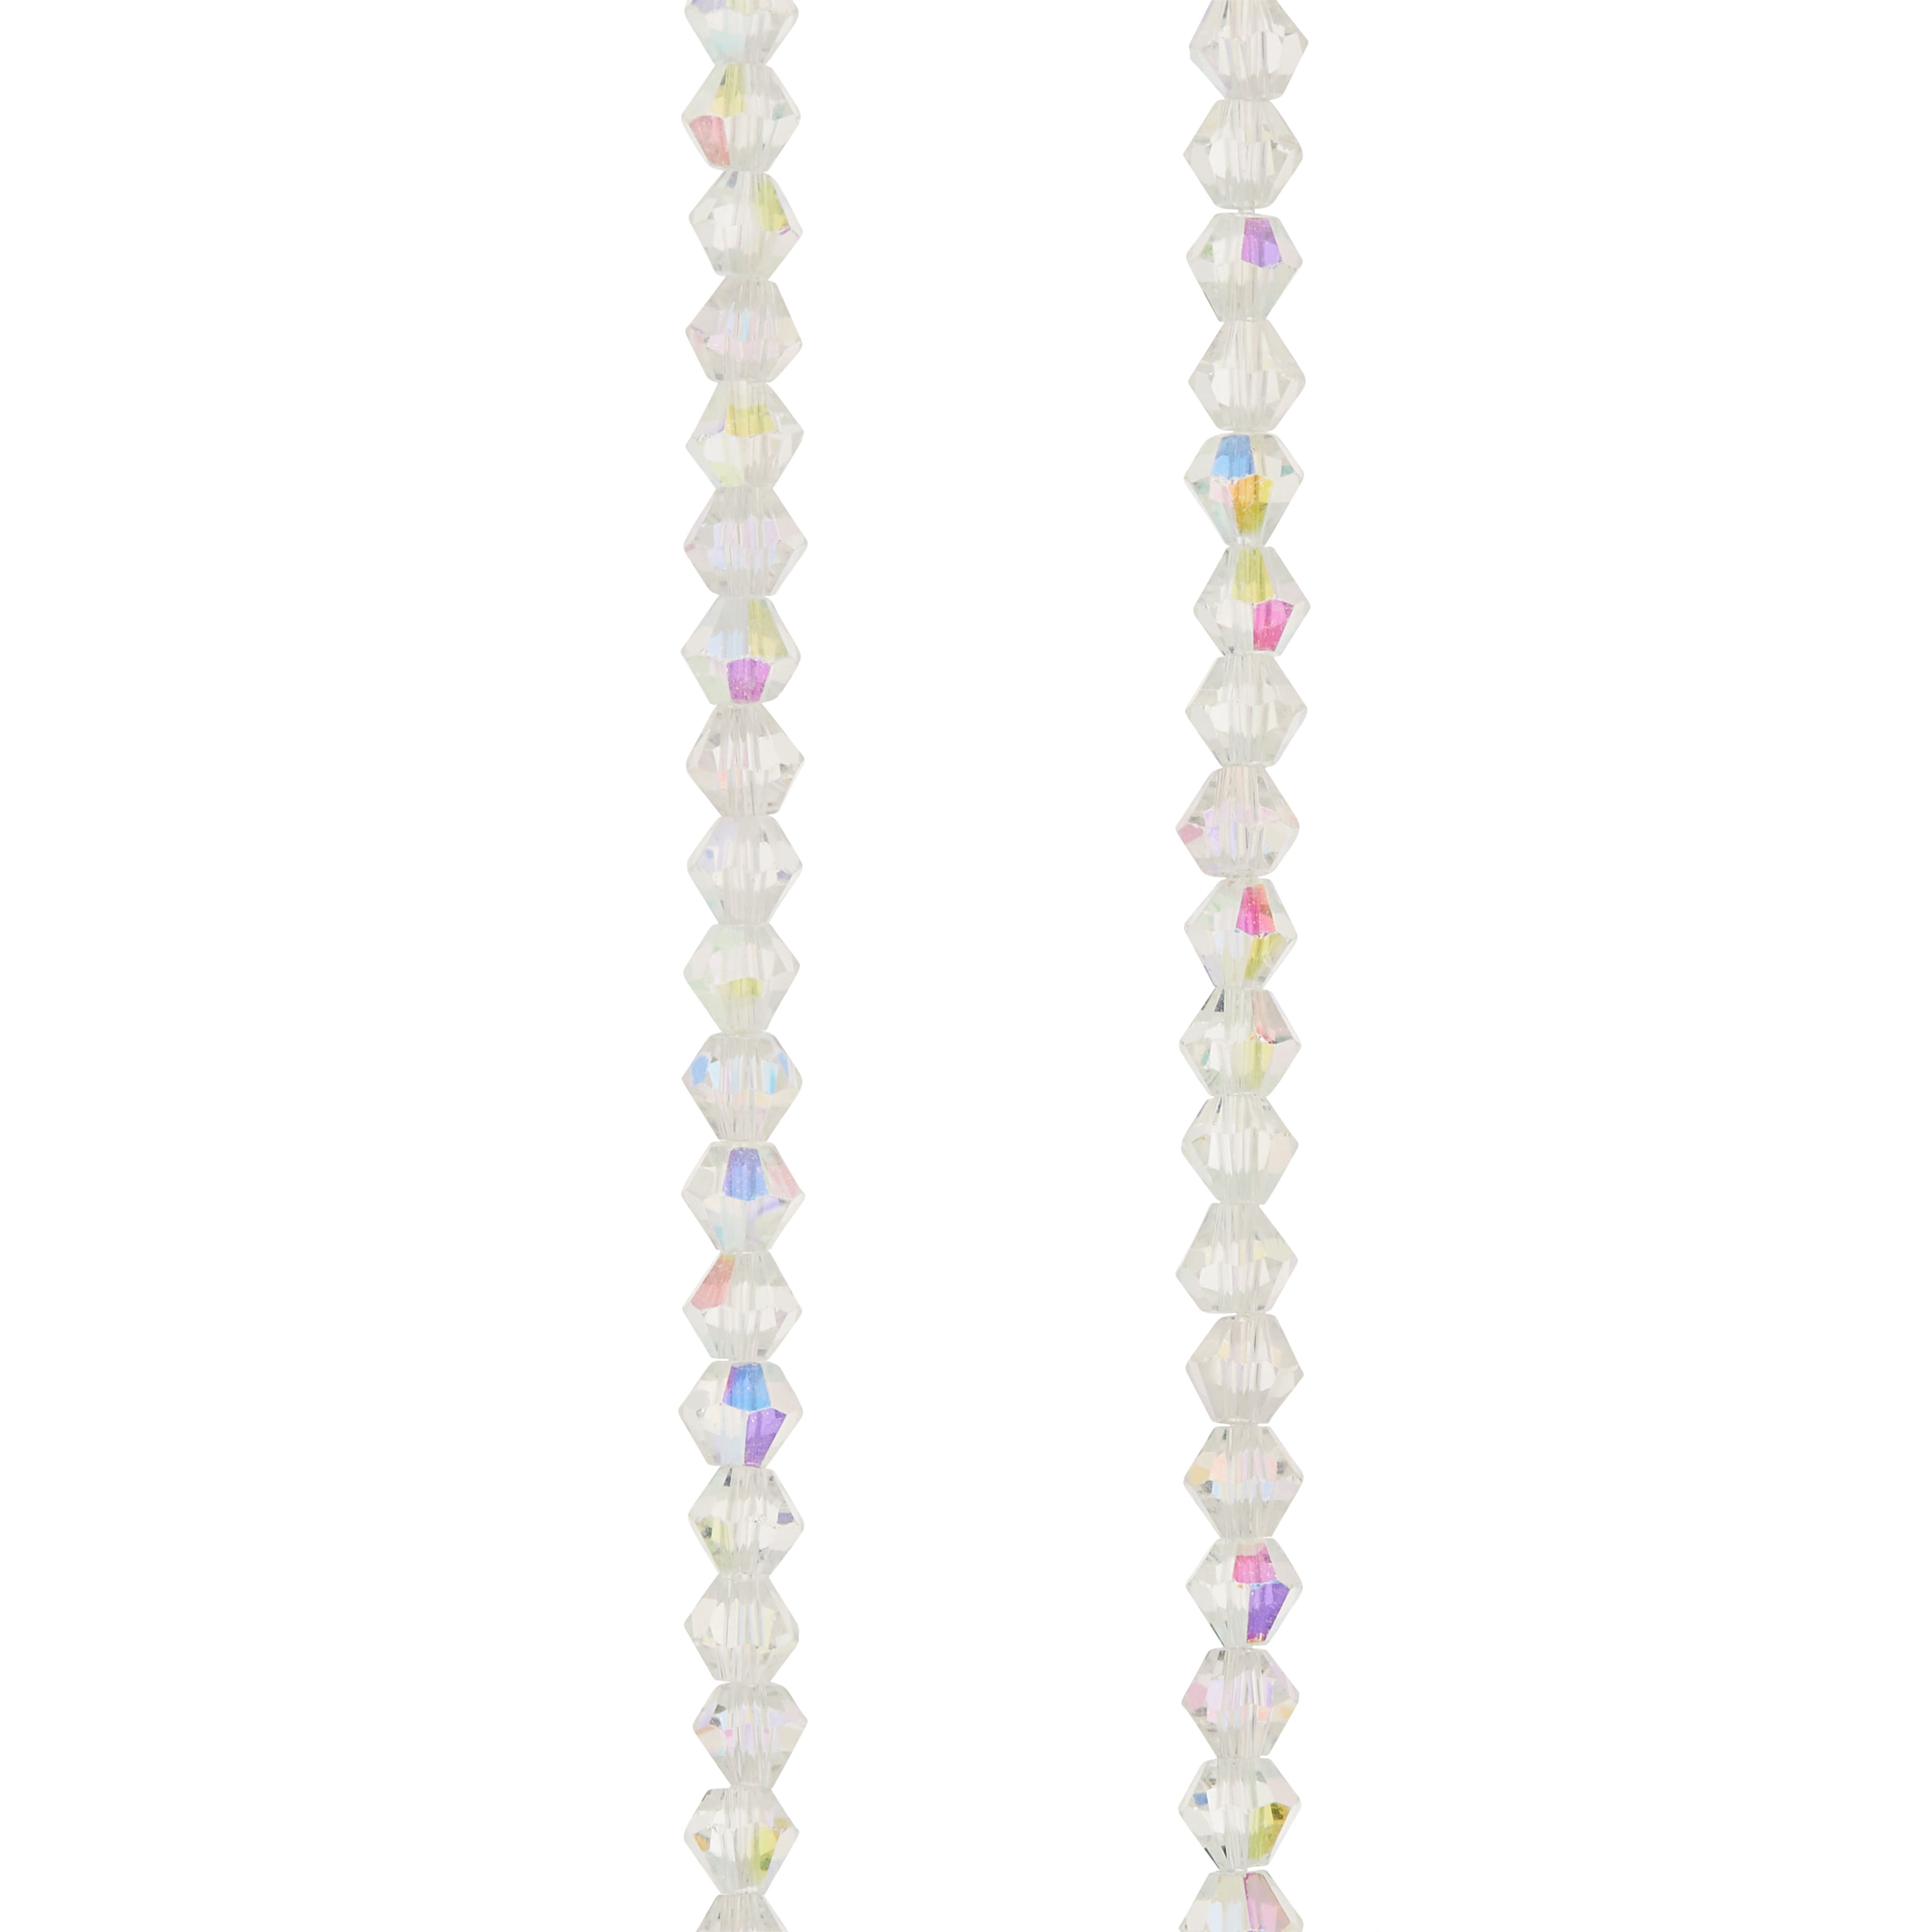 Preciosa Glass Crystal Round Beads, 4mm by Bead Landing™, Michaels